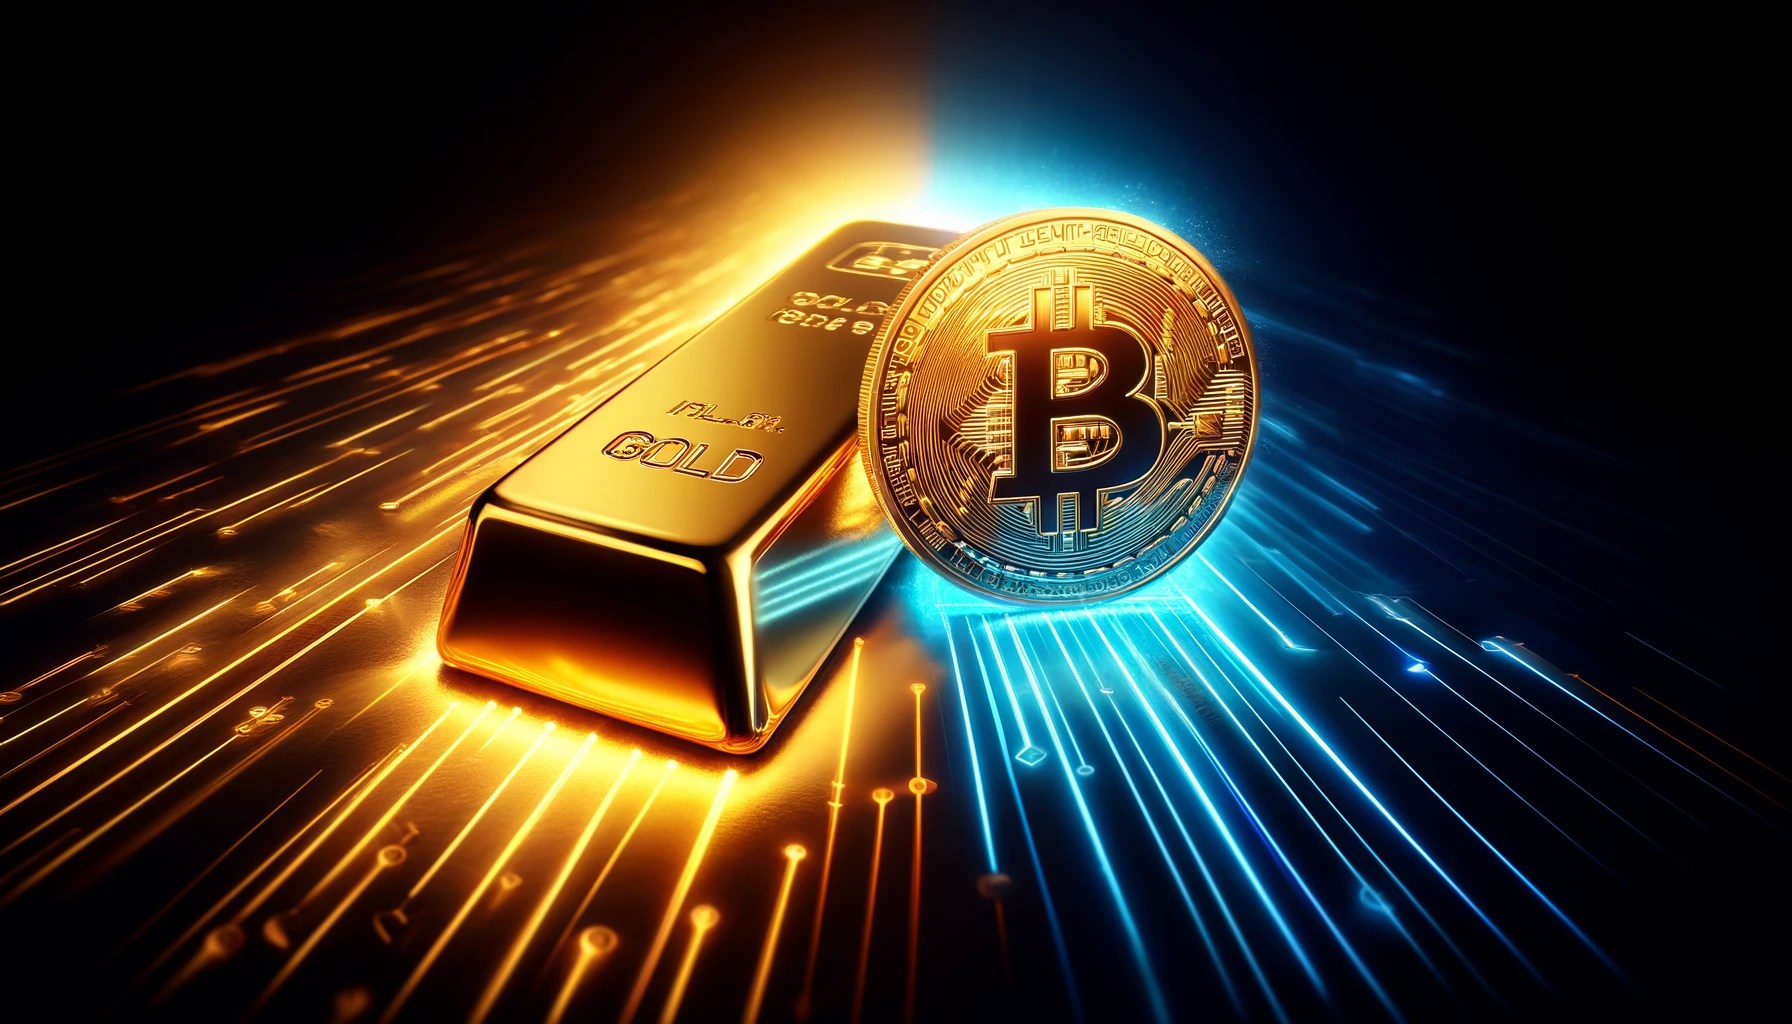 Bitcoin Price ‘Screams Huge Opportunity’ As Gold Records Historic High